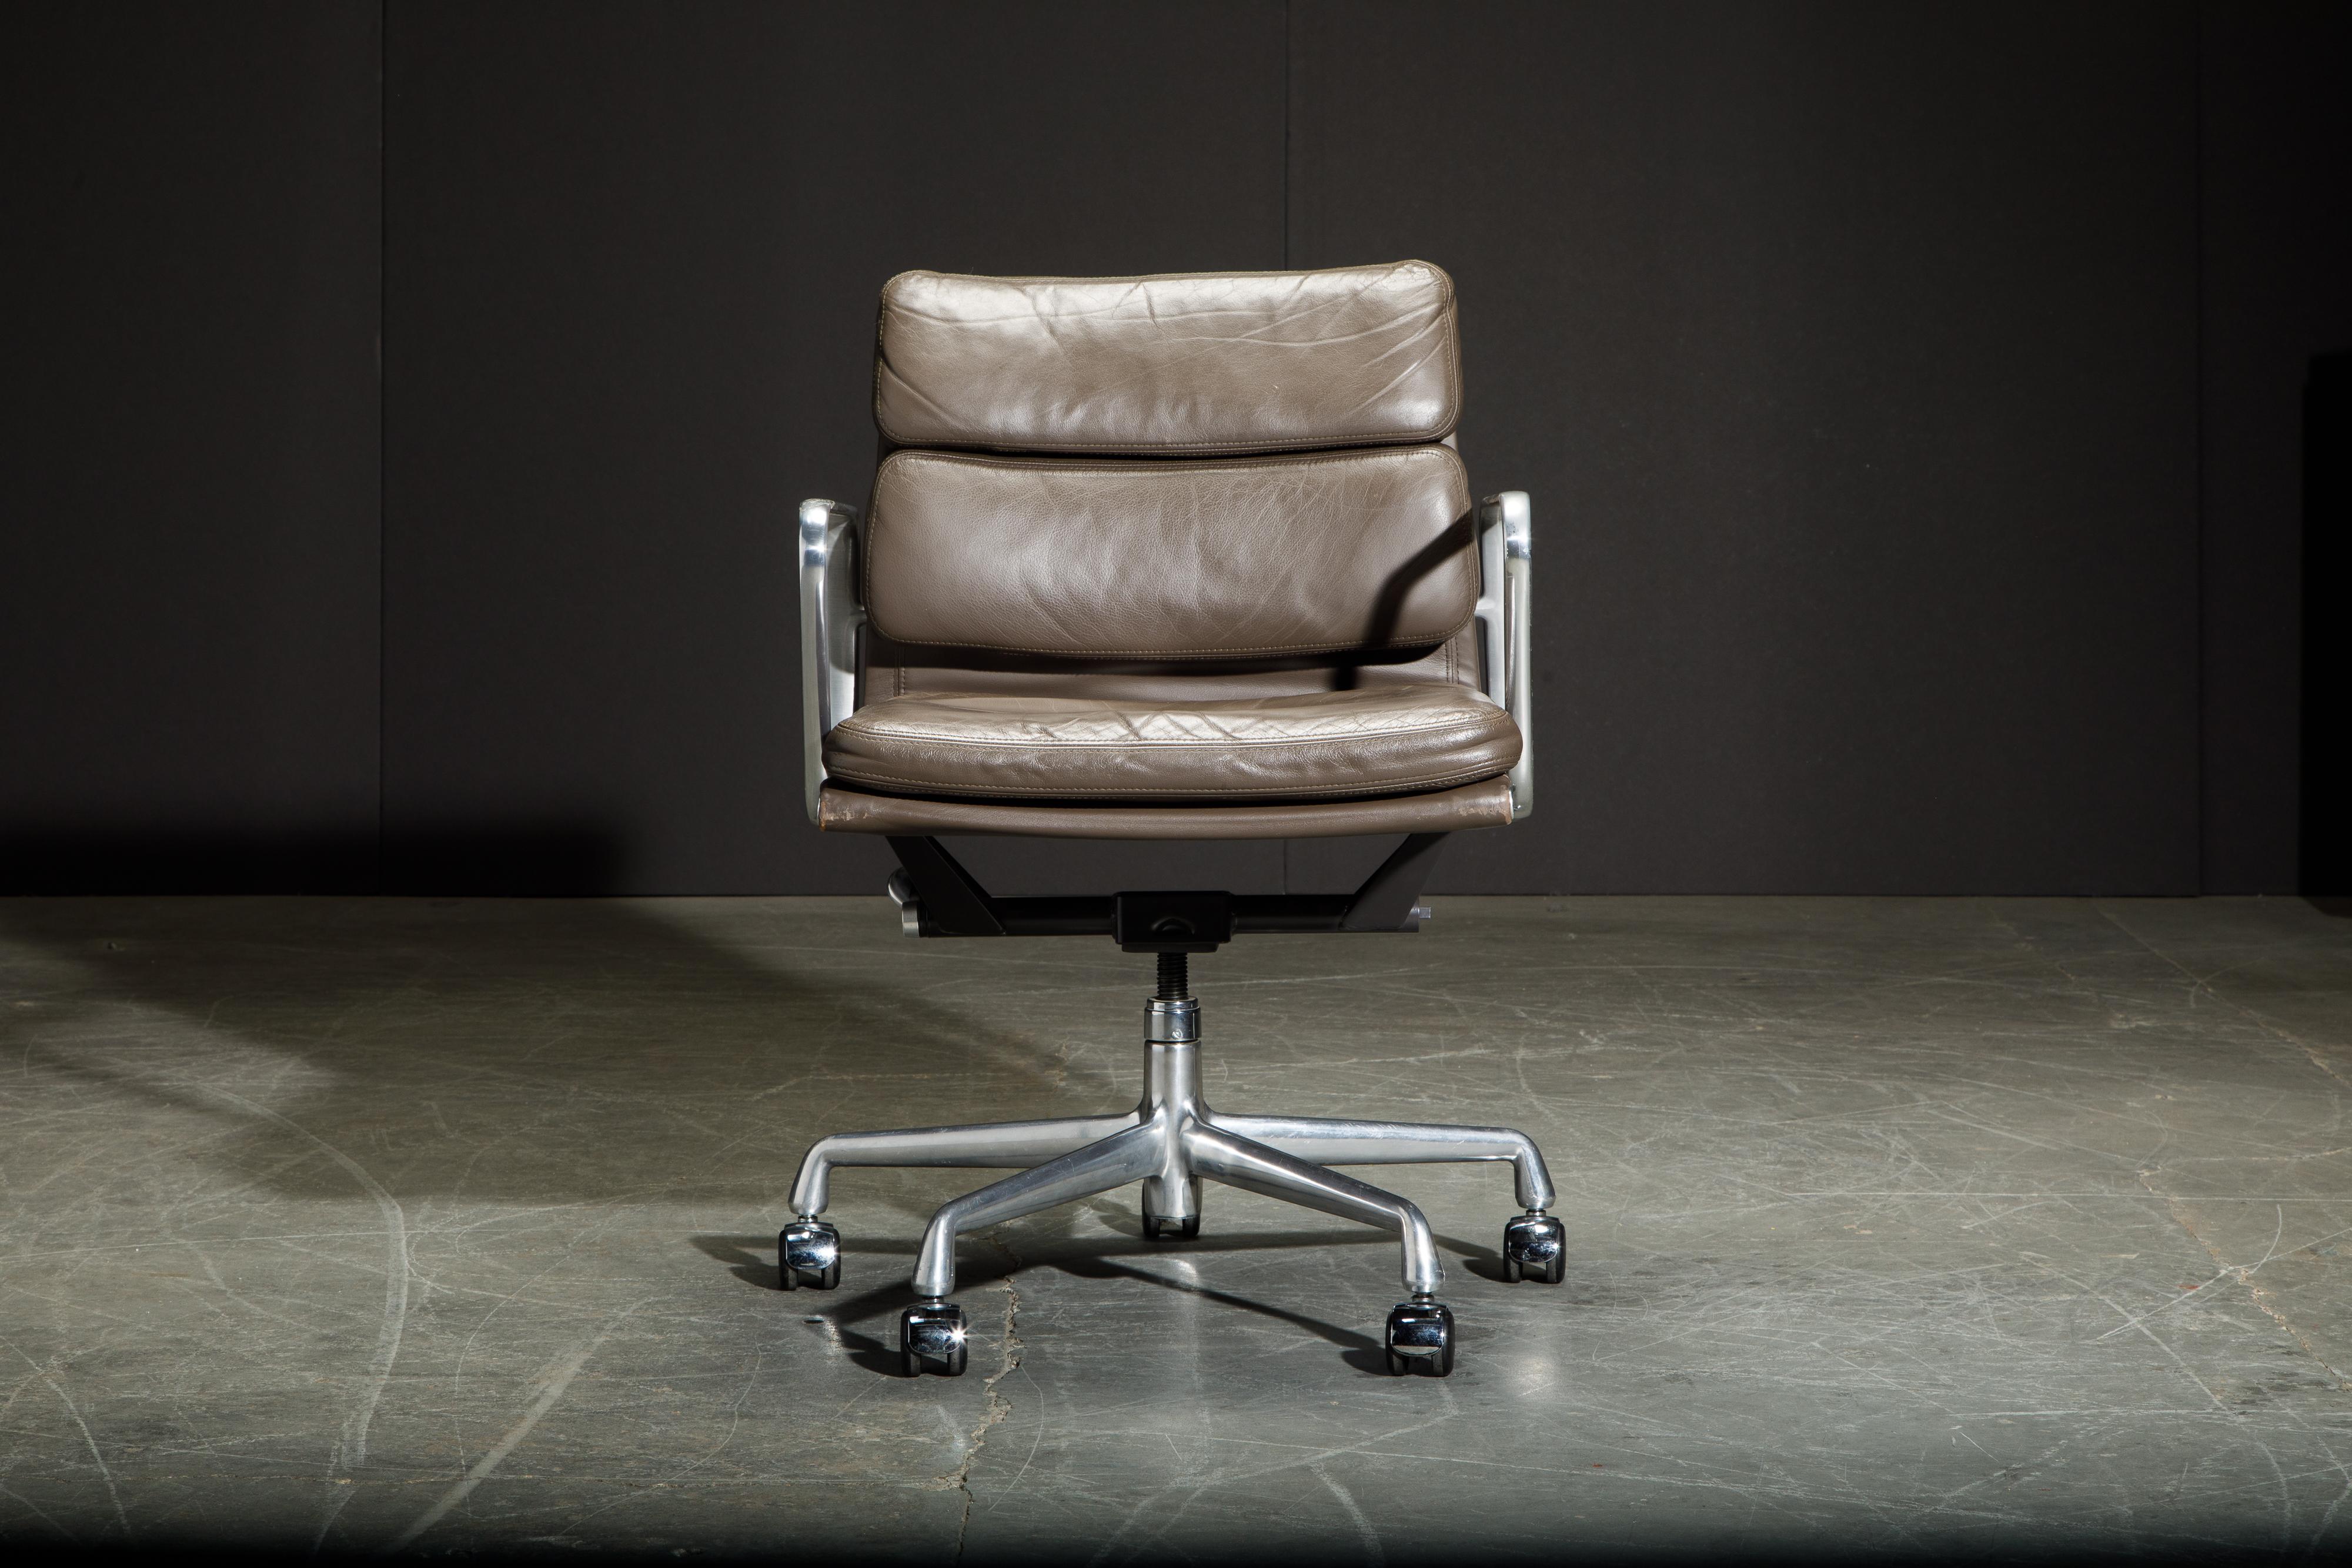 This sought after and in-demand leather desk chair is the classic 'Soft Pad Management Chair' from the aluminum group line, designed by Charles and Ray Eames for Herman Miller. Featuring its original vintage leather upholstery over five-star